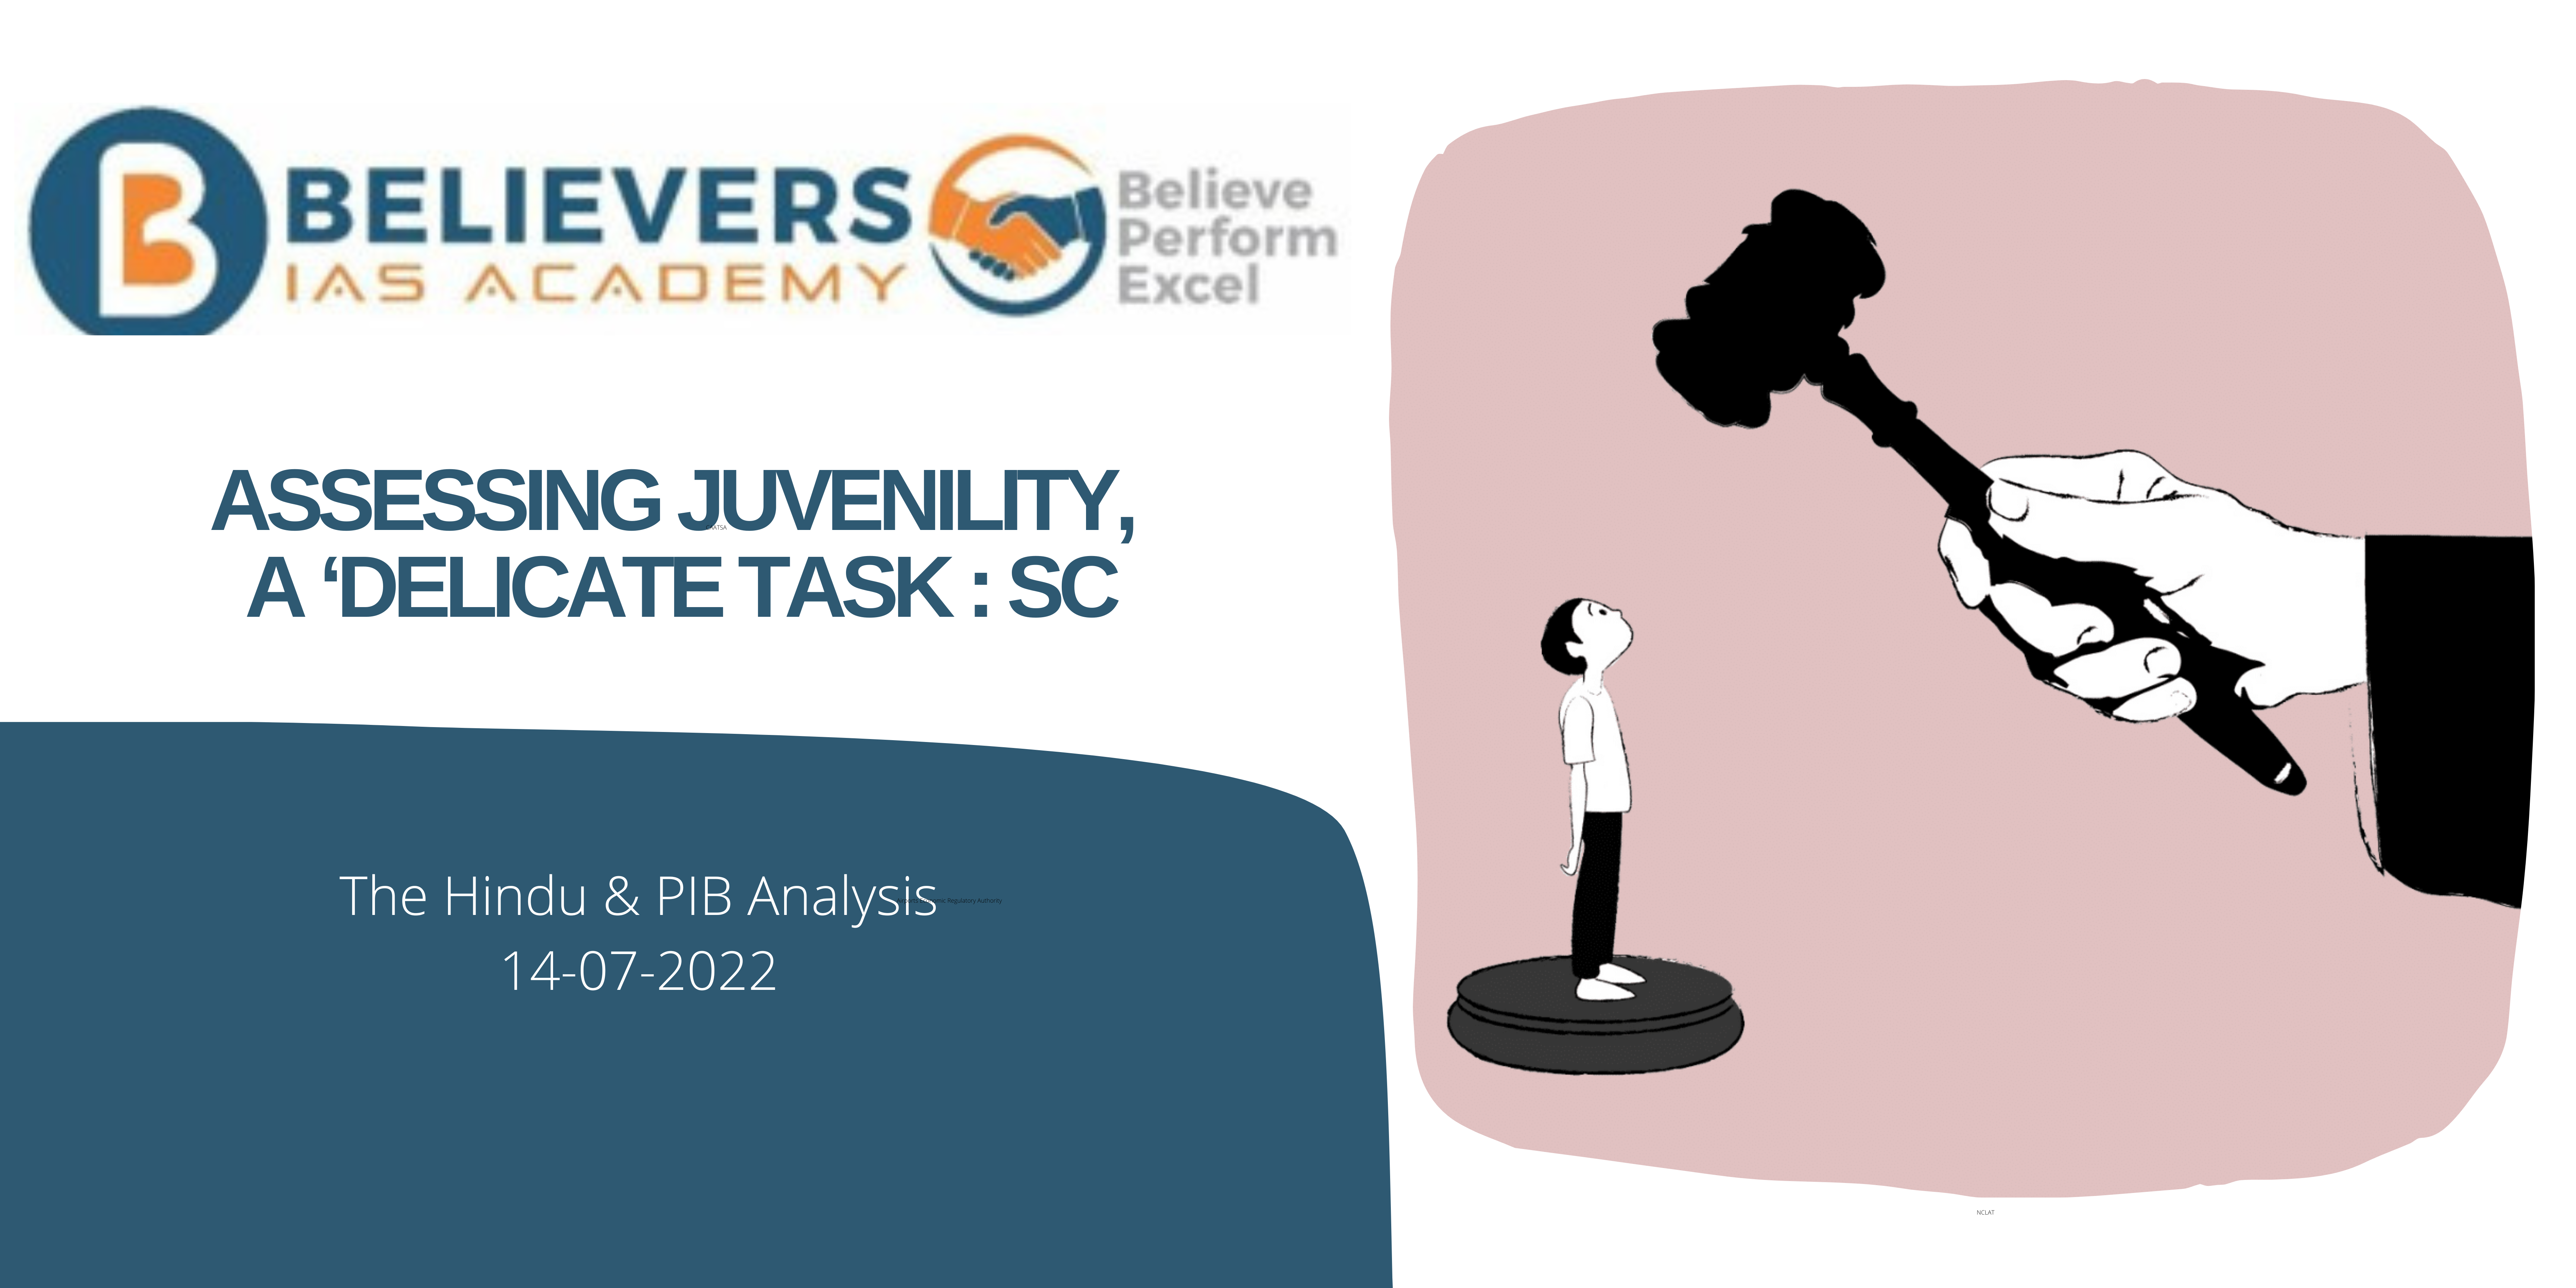 UPSC Current affairs - Accessing Juvenility: A Delicate Task: SC